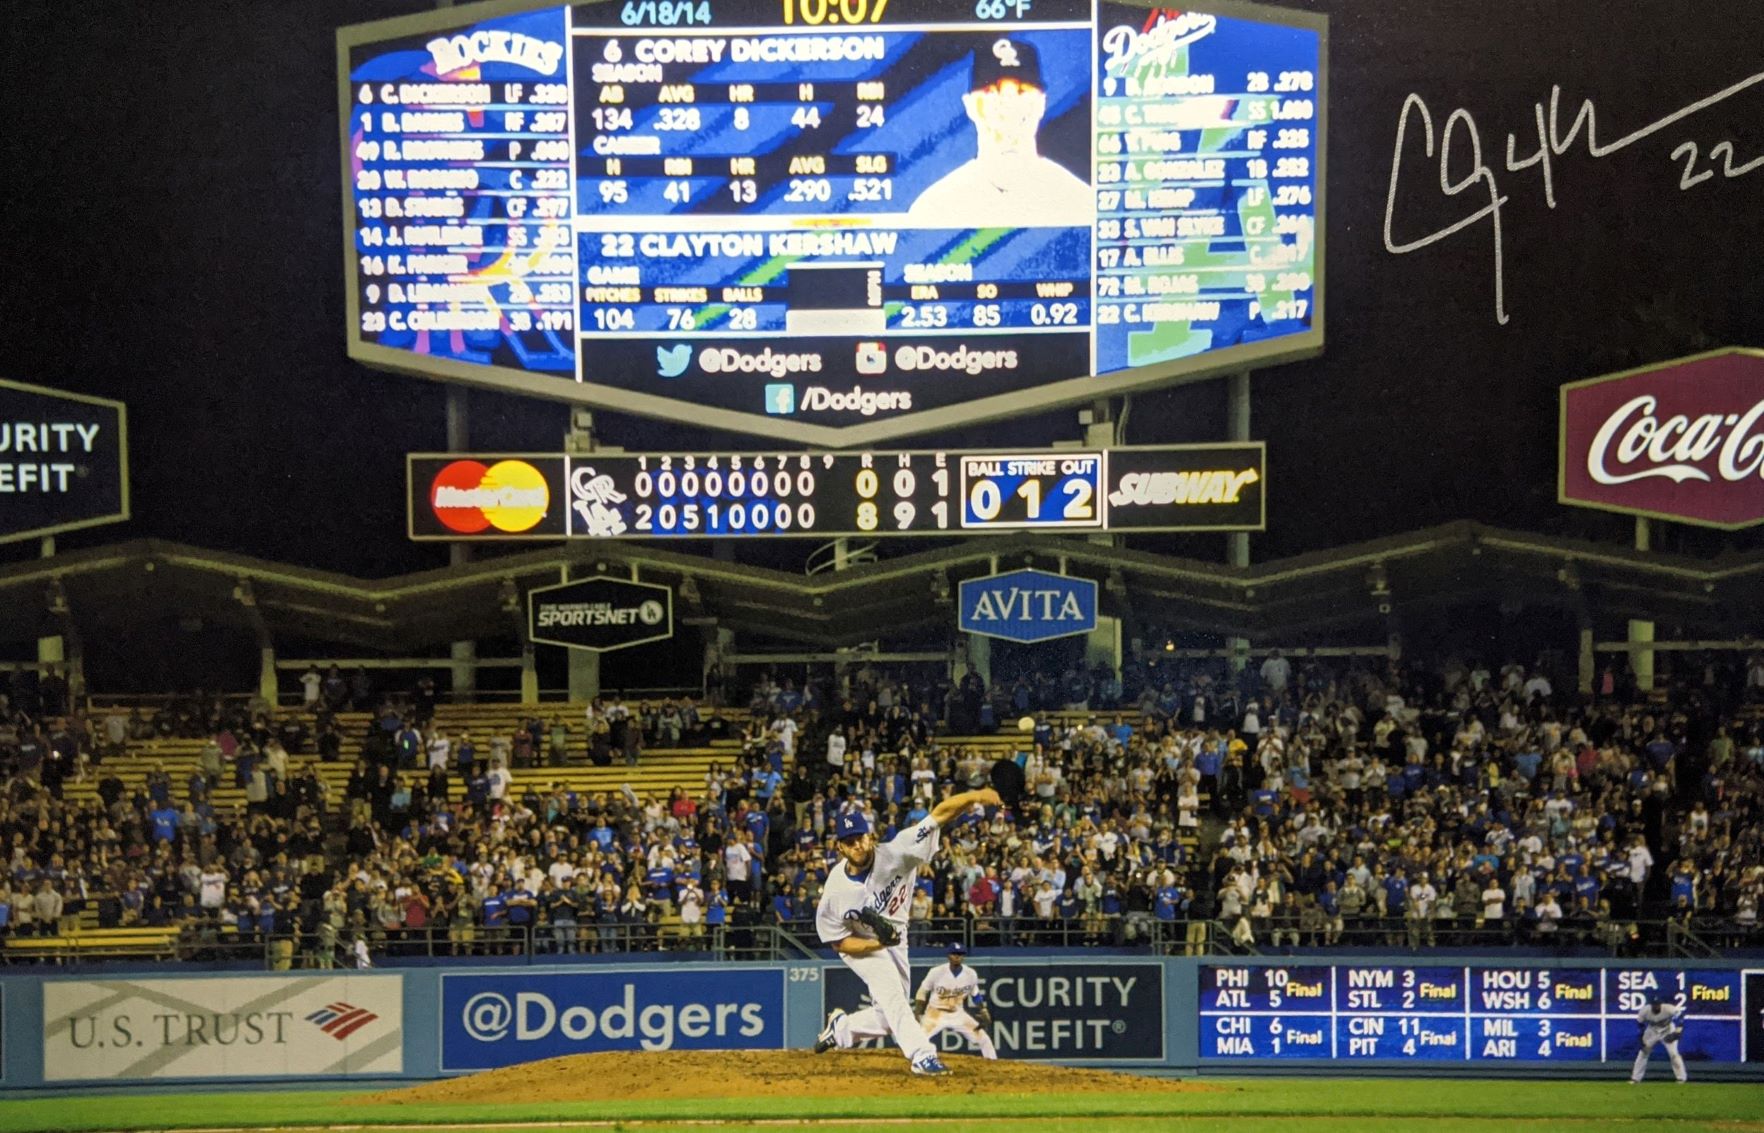 Clayton Kershaw giclee print on canvas poster painting no autograph B-0887 